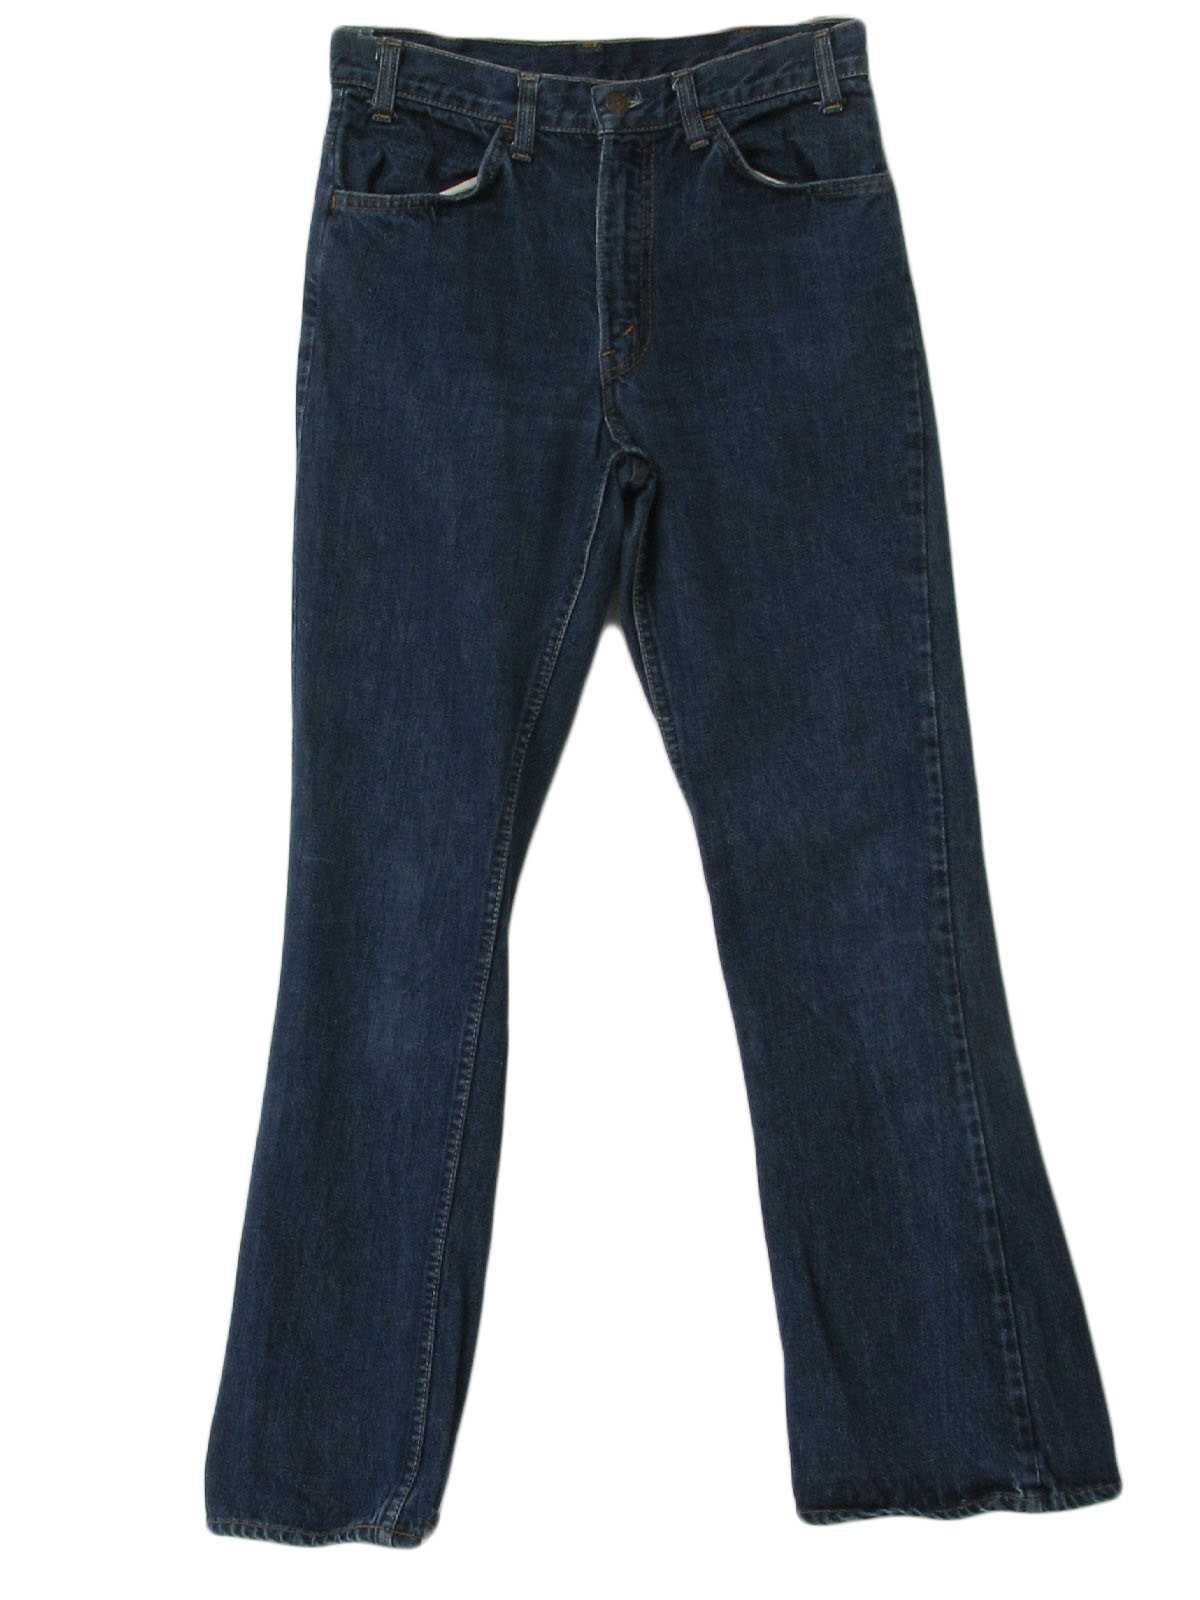 1960's Vintage Levis Bellbottom Pants: Late 60s or early 70s -Levis ...